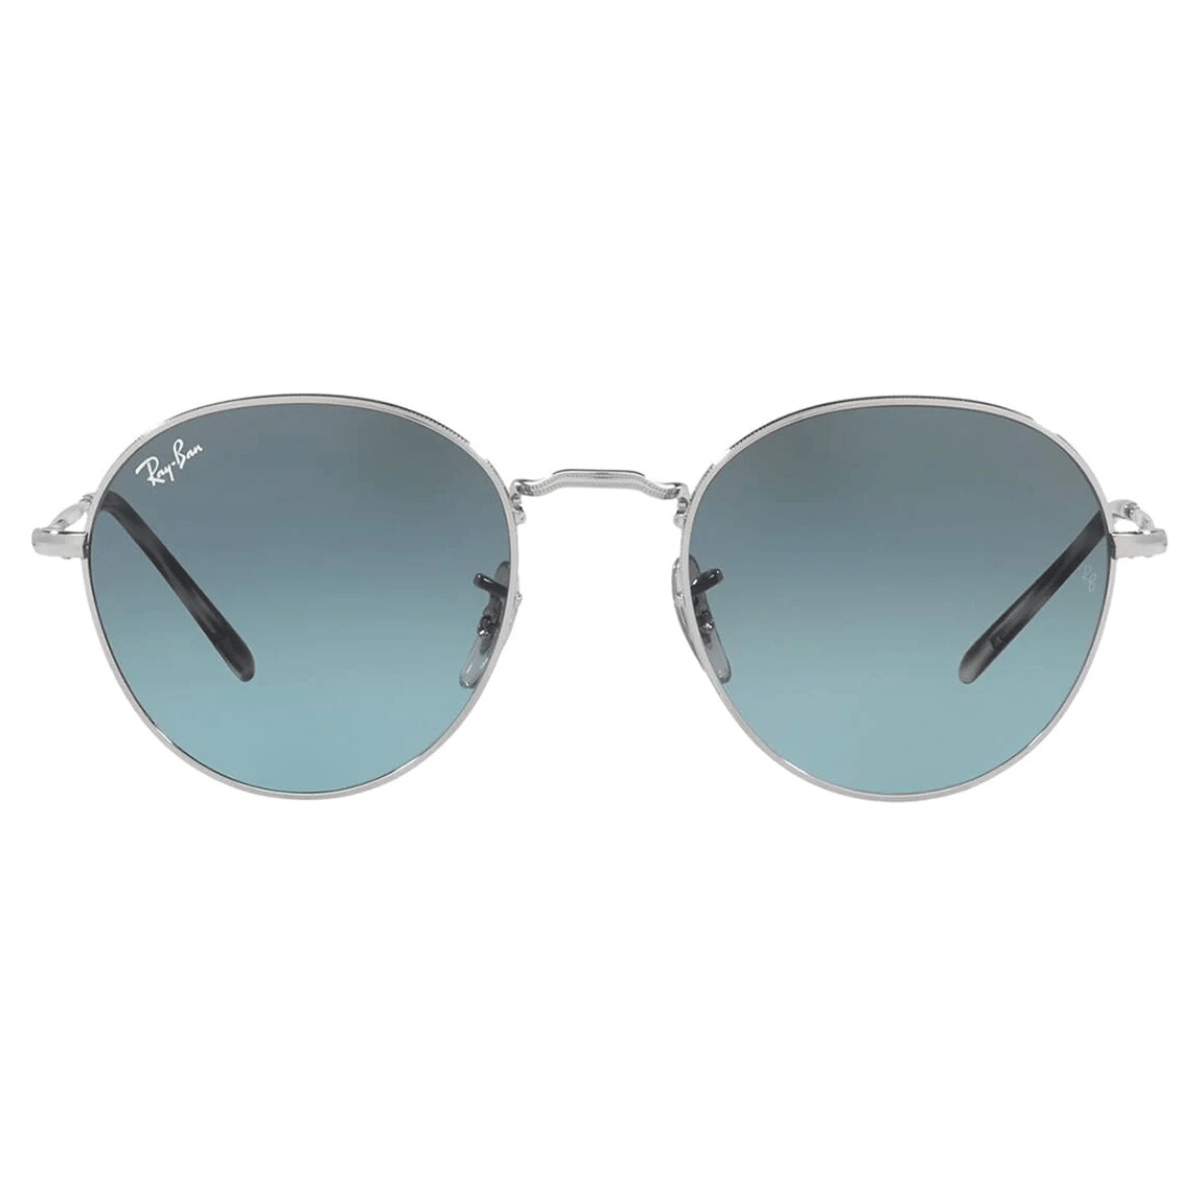 "Rayban RB3582 Sunglass: Phantos shaped sunglass with polished silver frame and Rayban blue shades, available at Optorium. Perfect for both men and women. Elevate your Rayban eyewear collection with this stylish sunglass."